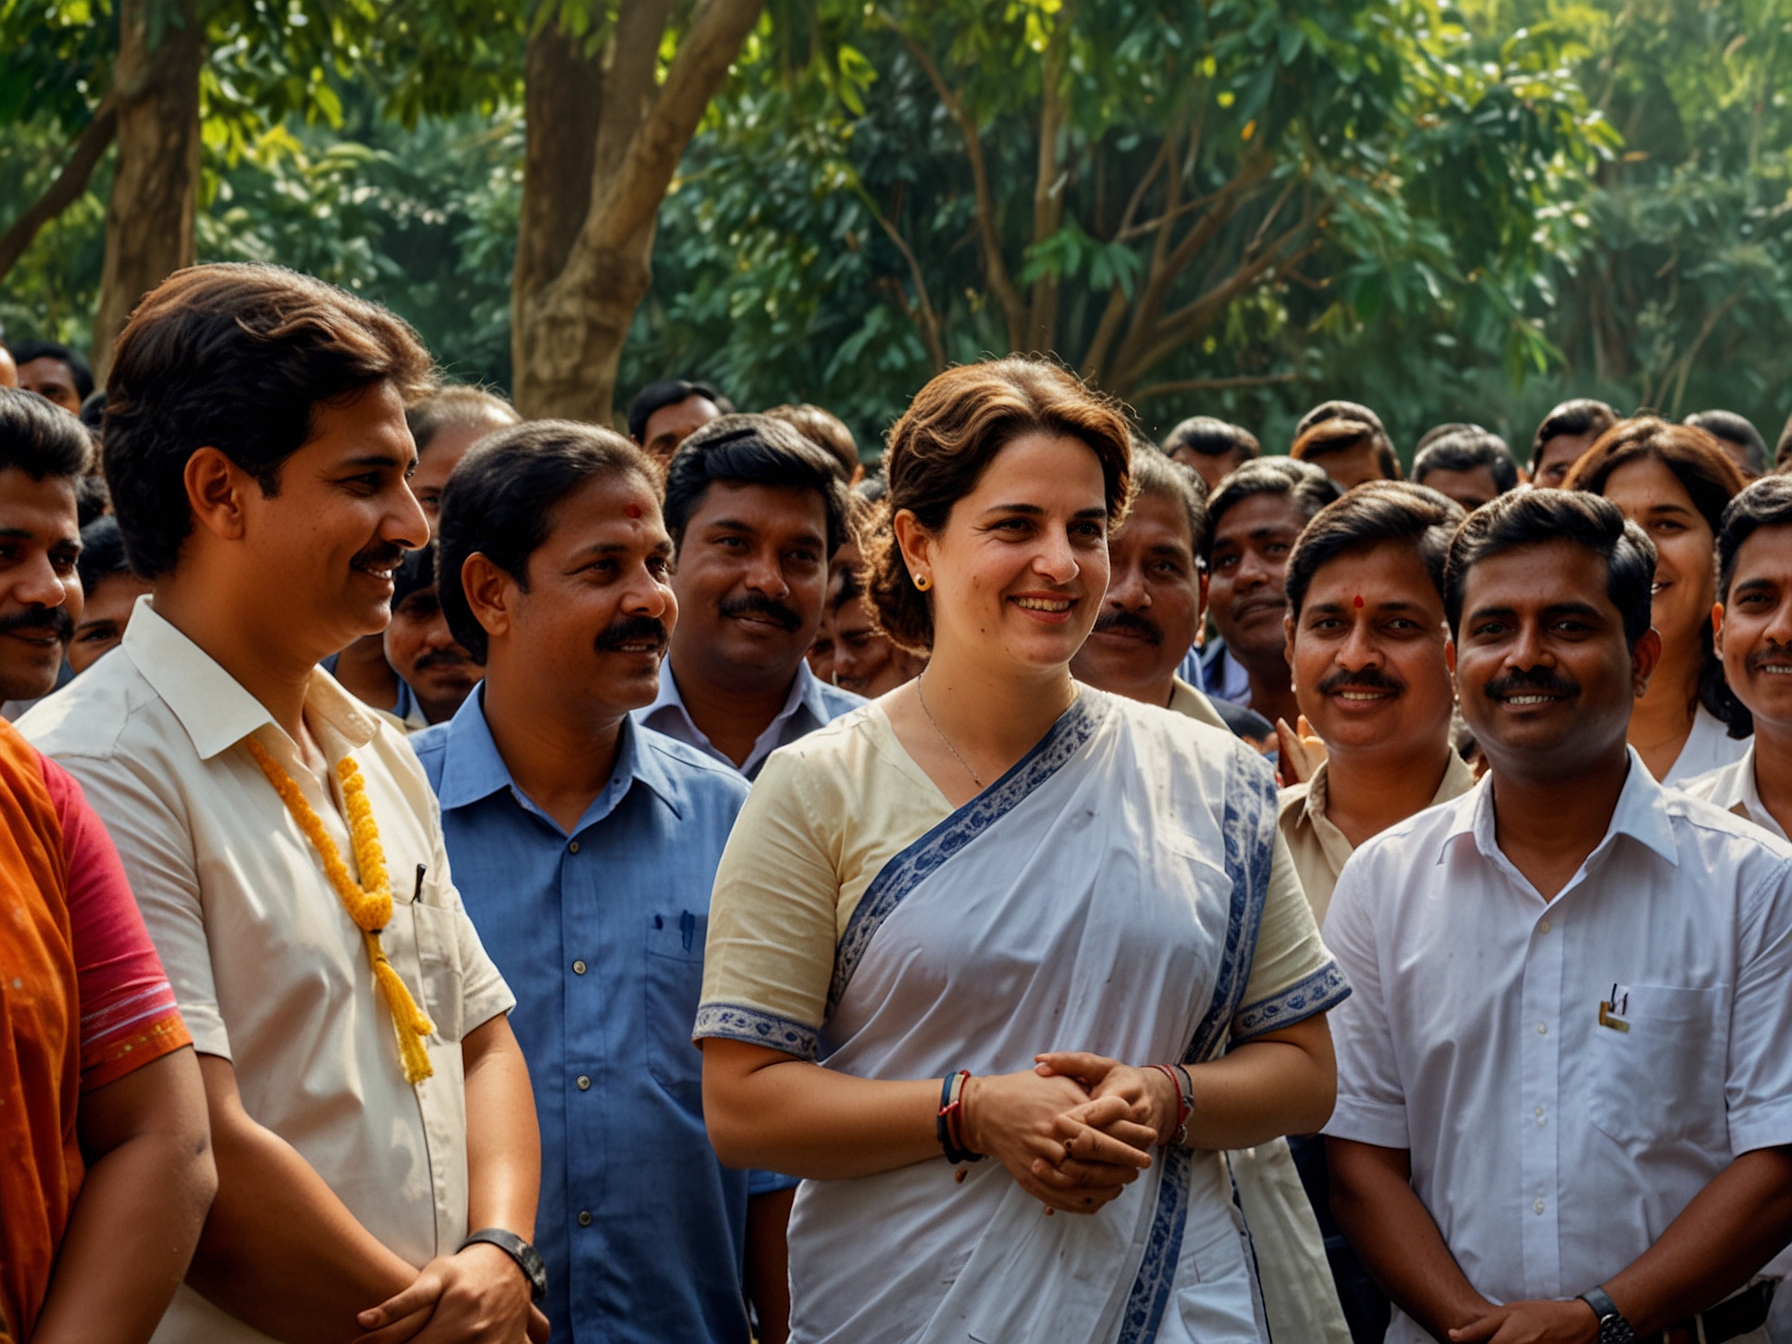 Priyanka Gandhi engaging with voters in Wayanad, marking her debut in parliamentary elections and aiming to rejuvenate the Congress campaign with her charisma.